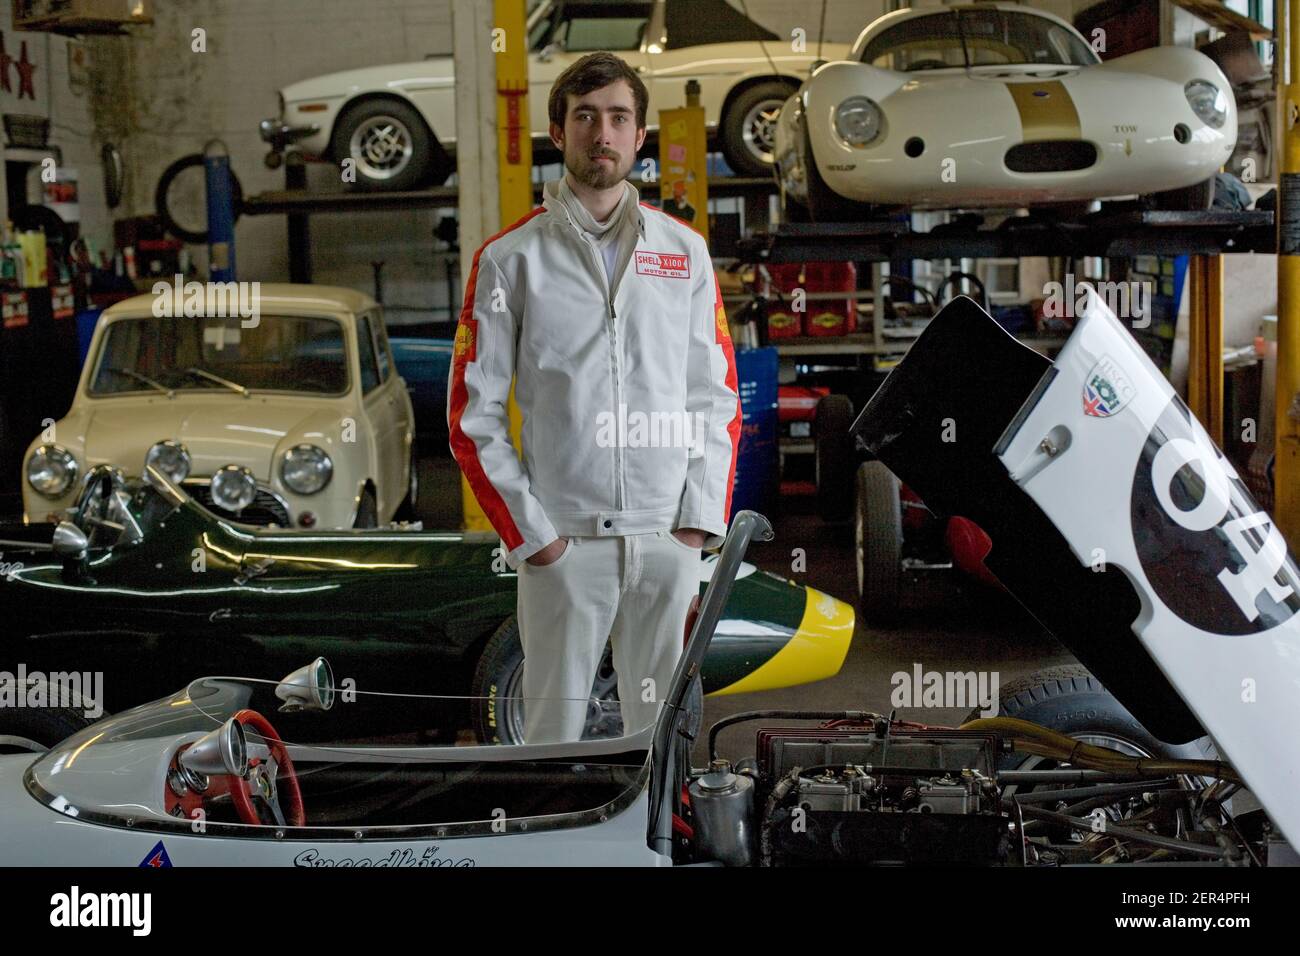 Portrait of young race car driver standing at classic garage workshop. Stock Photo